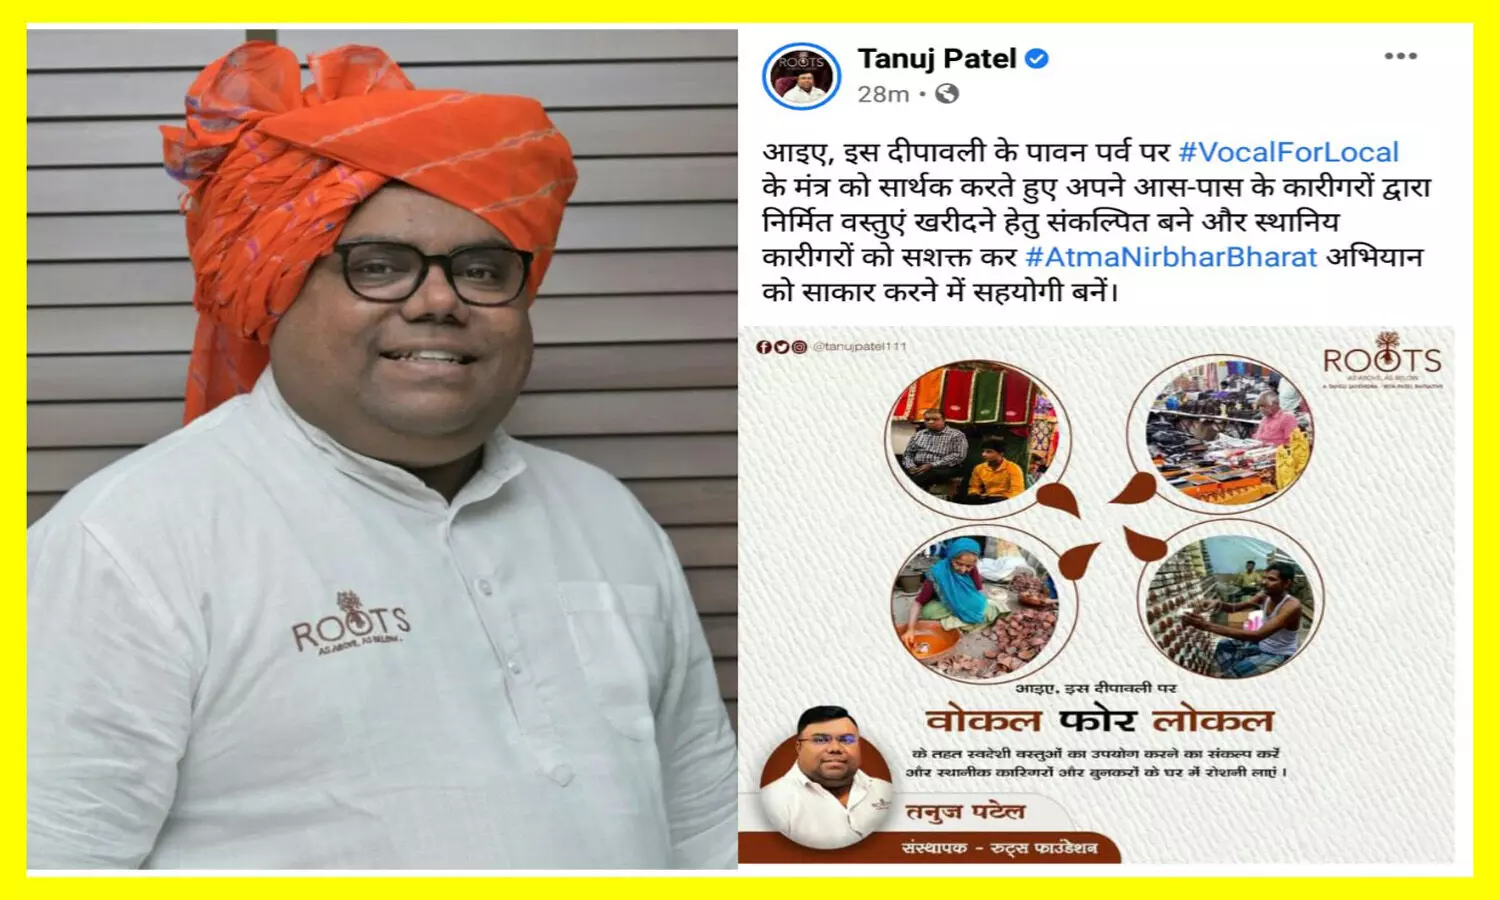 Social activist Tanuj Patel request people to go Vocal for Local in Diwali